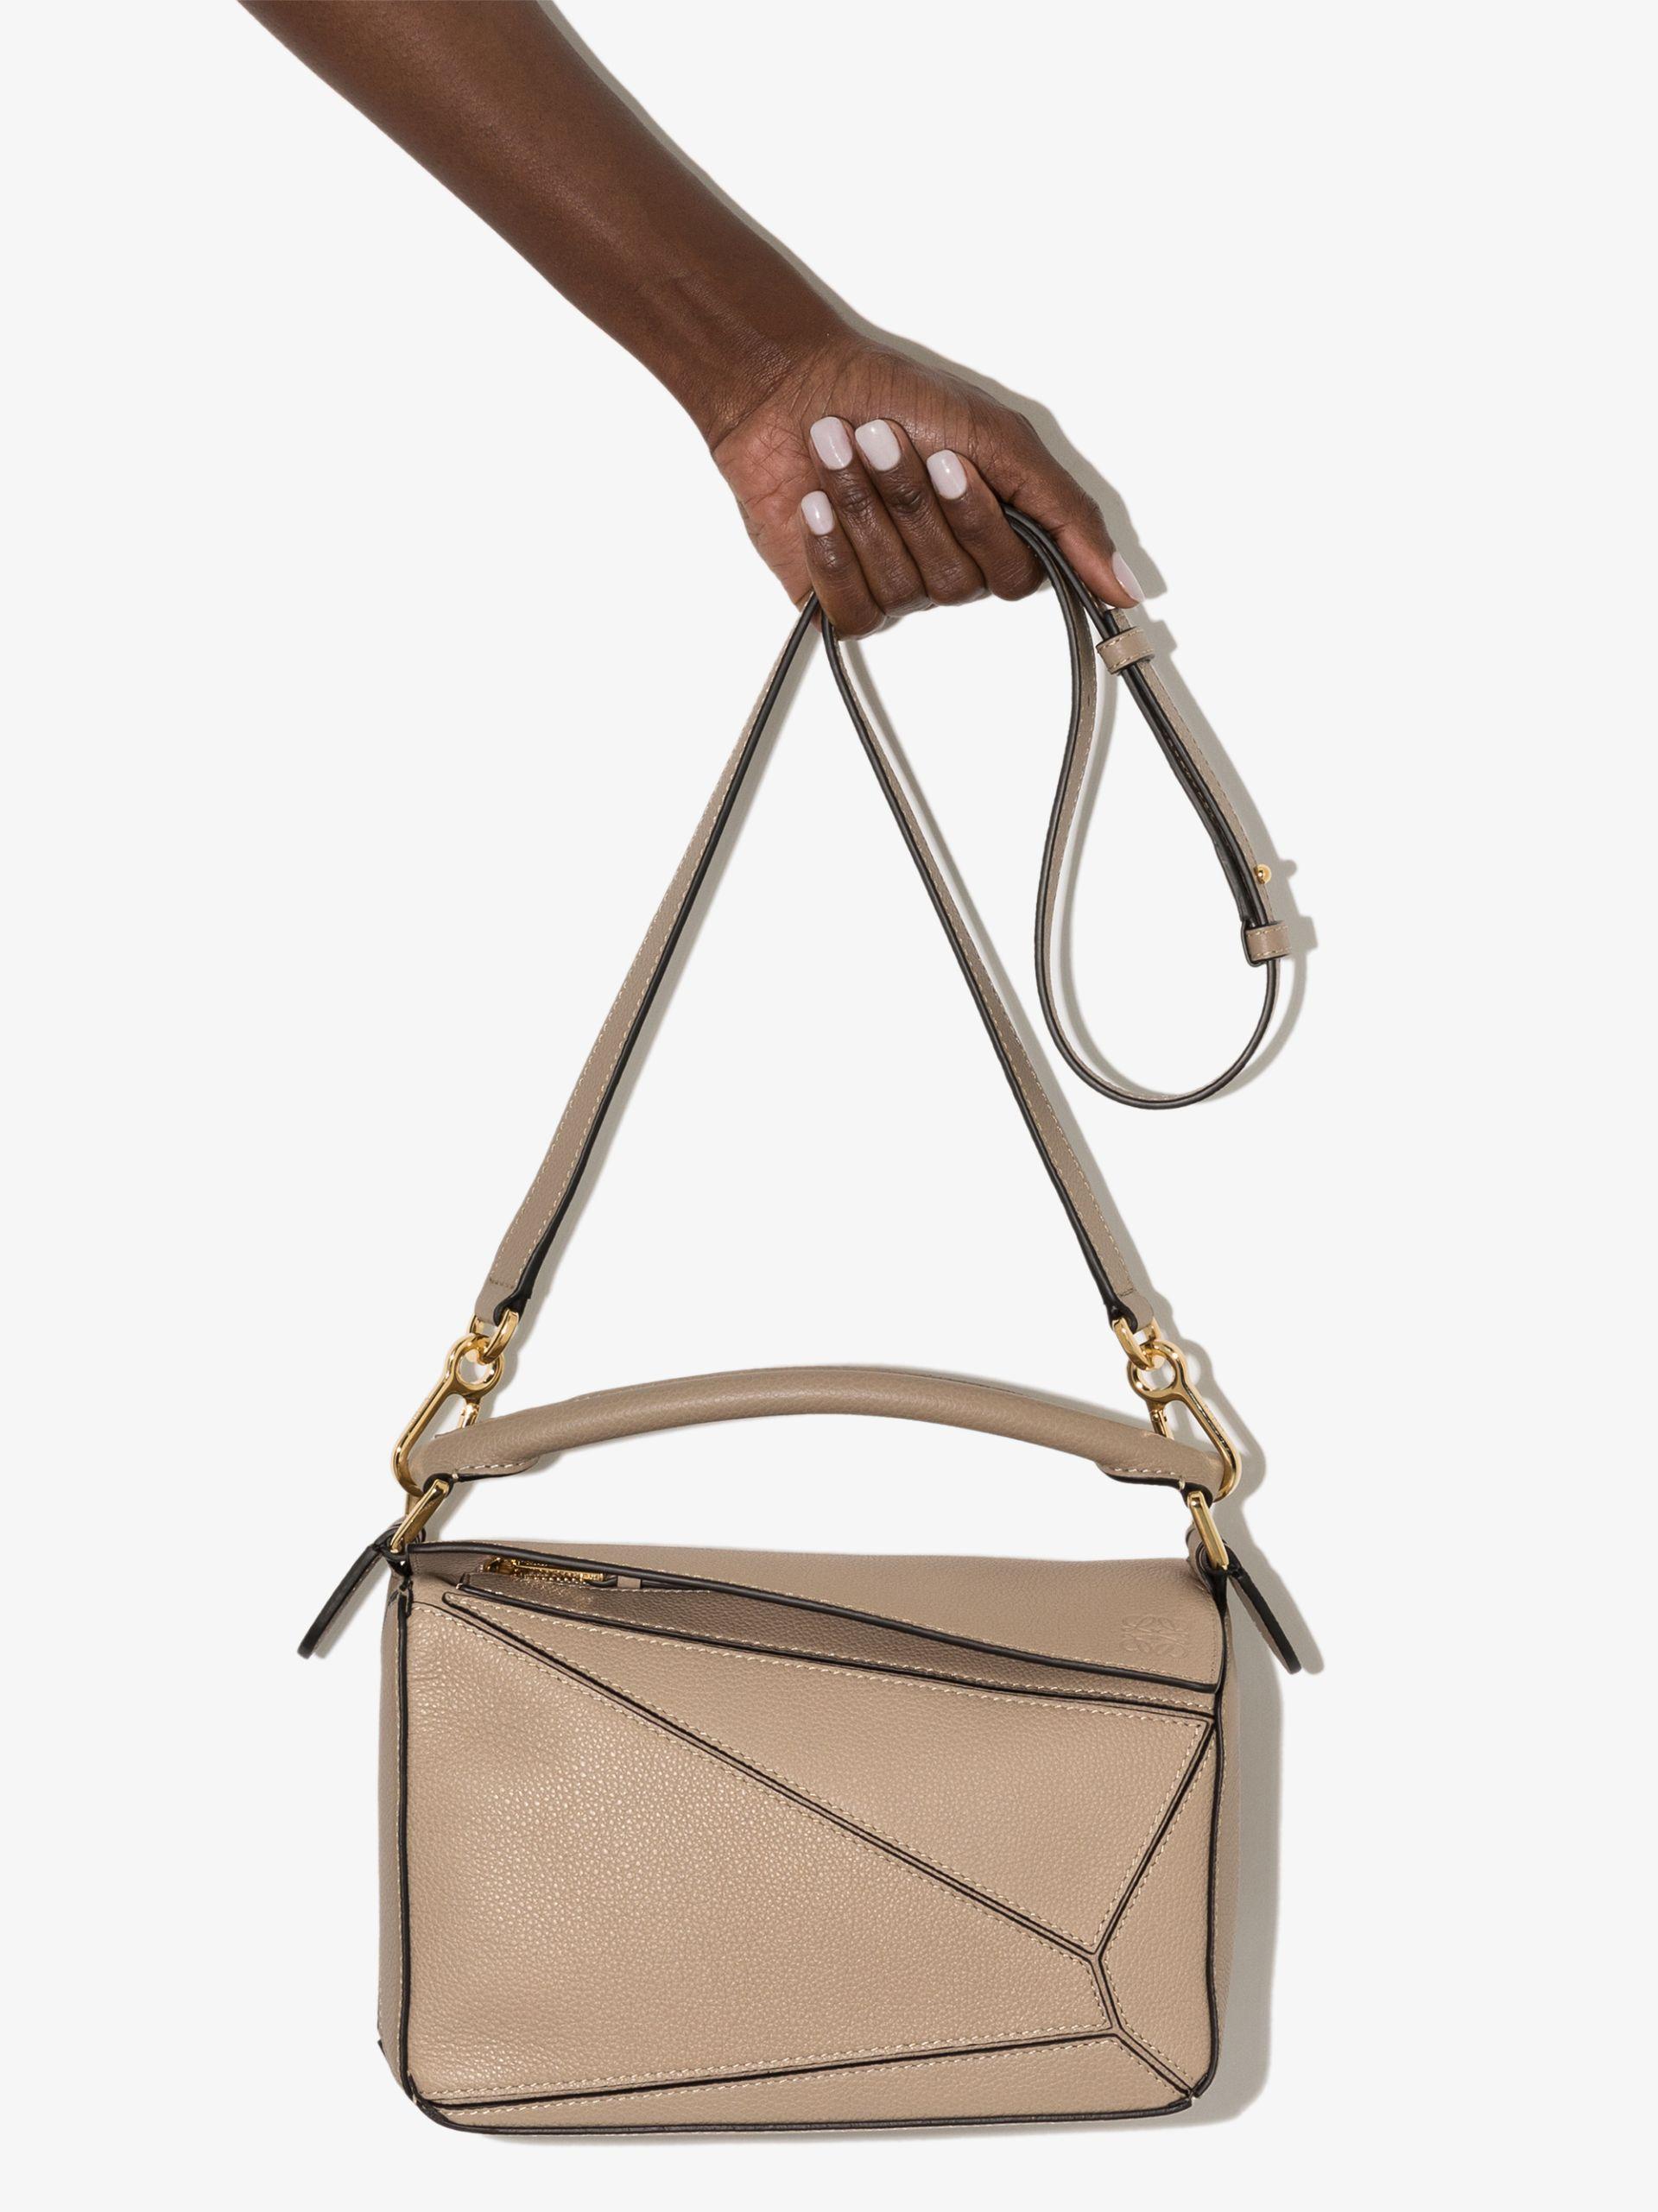 Loewe Small Puzzle Leather Shoulder Bag